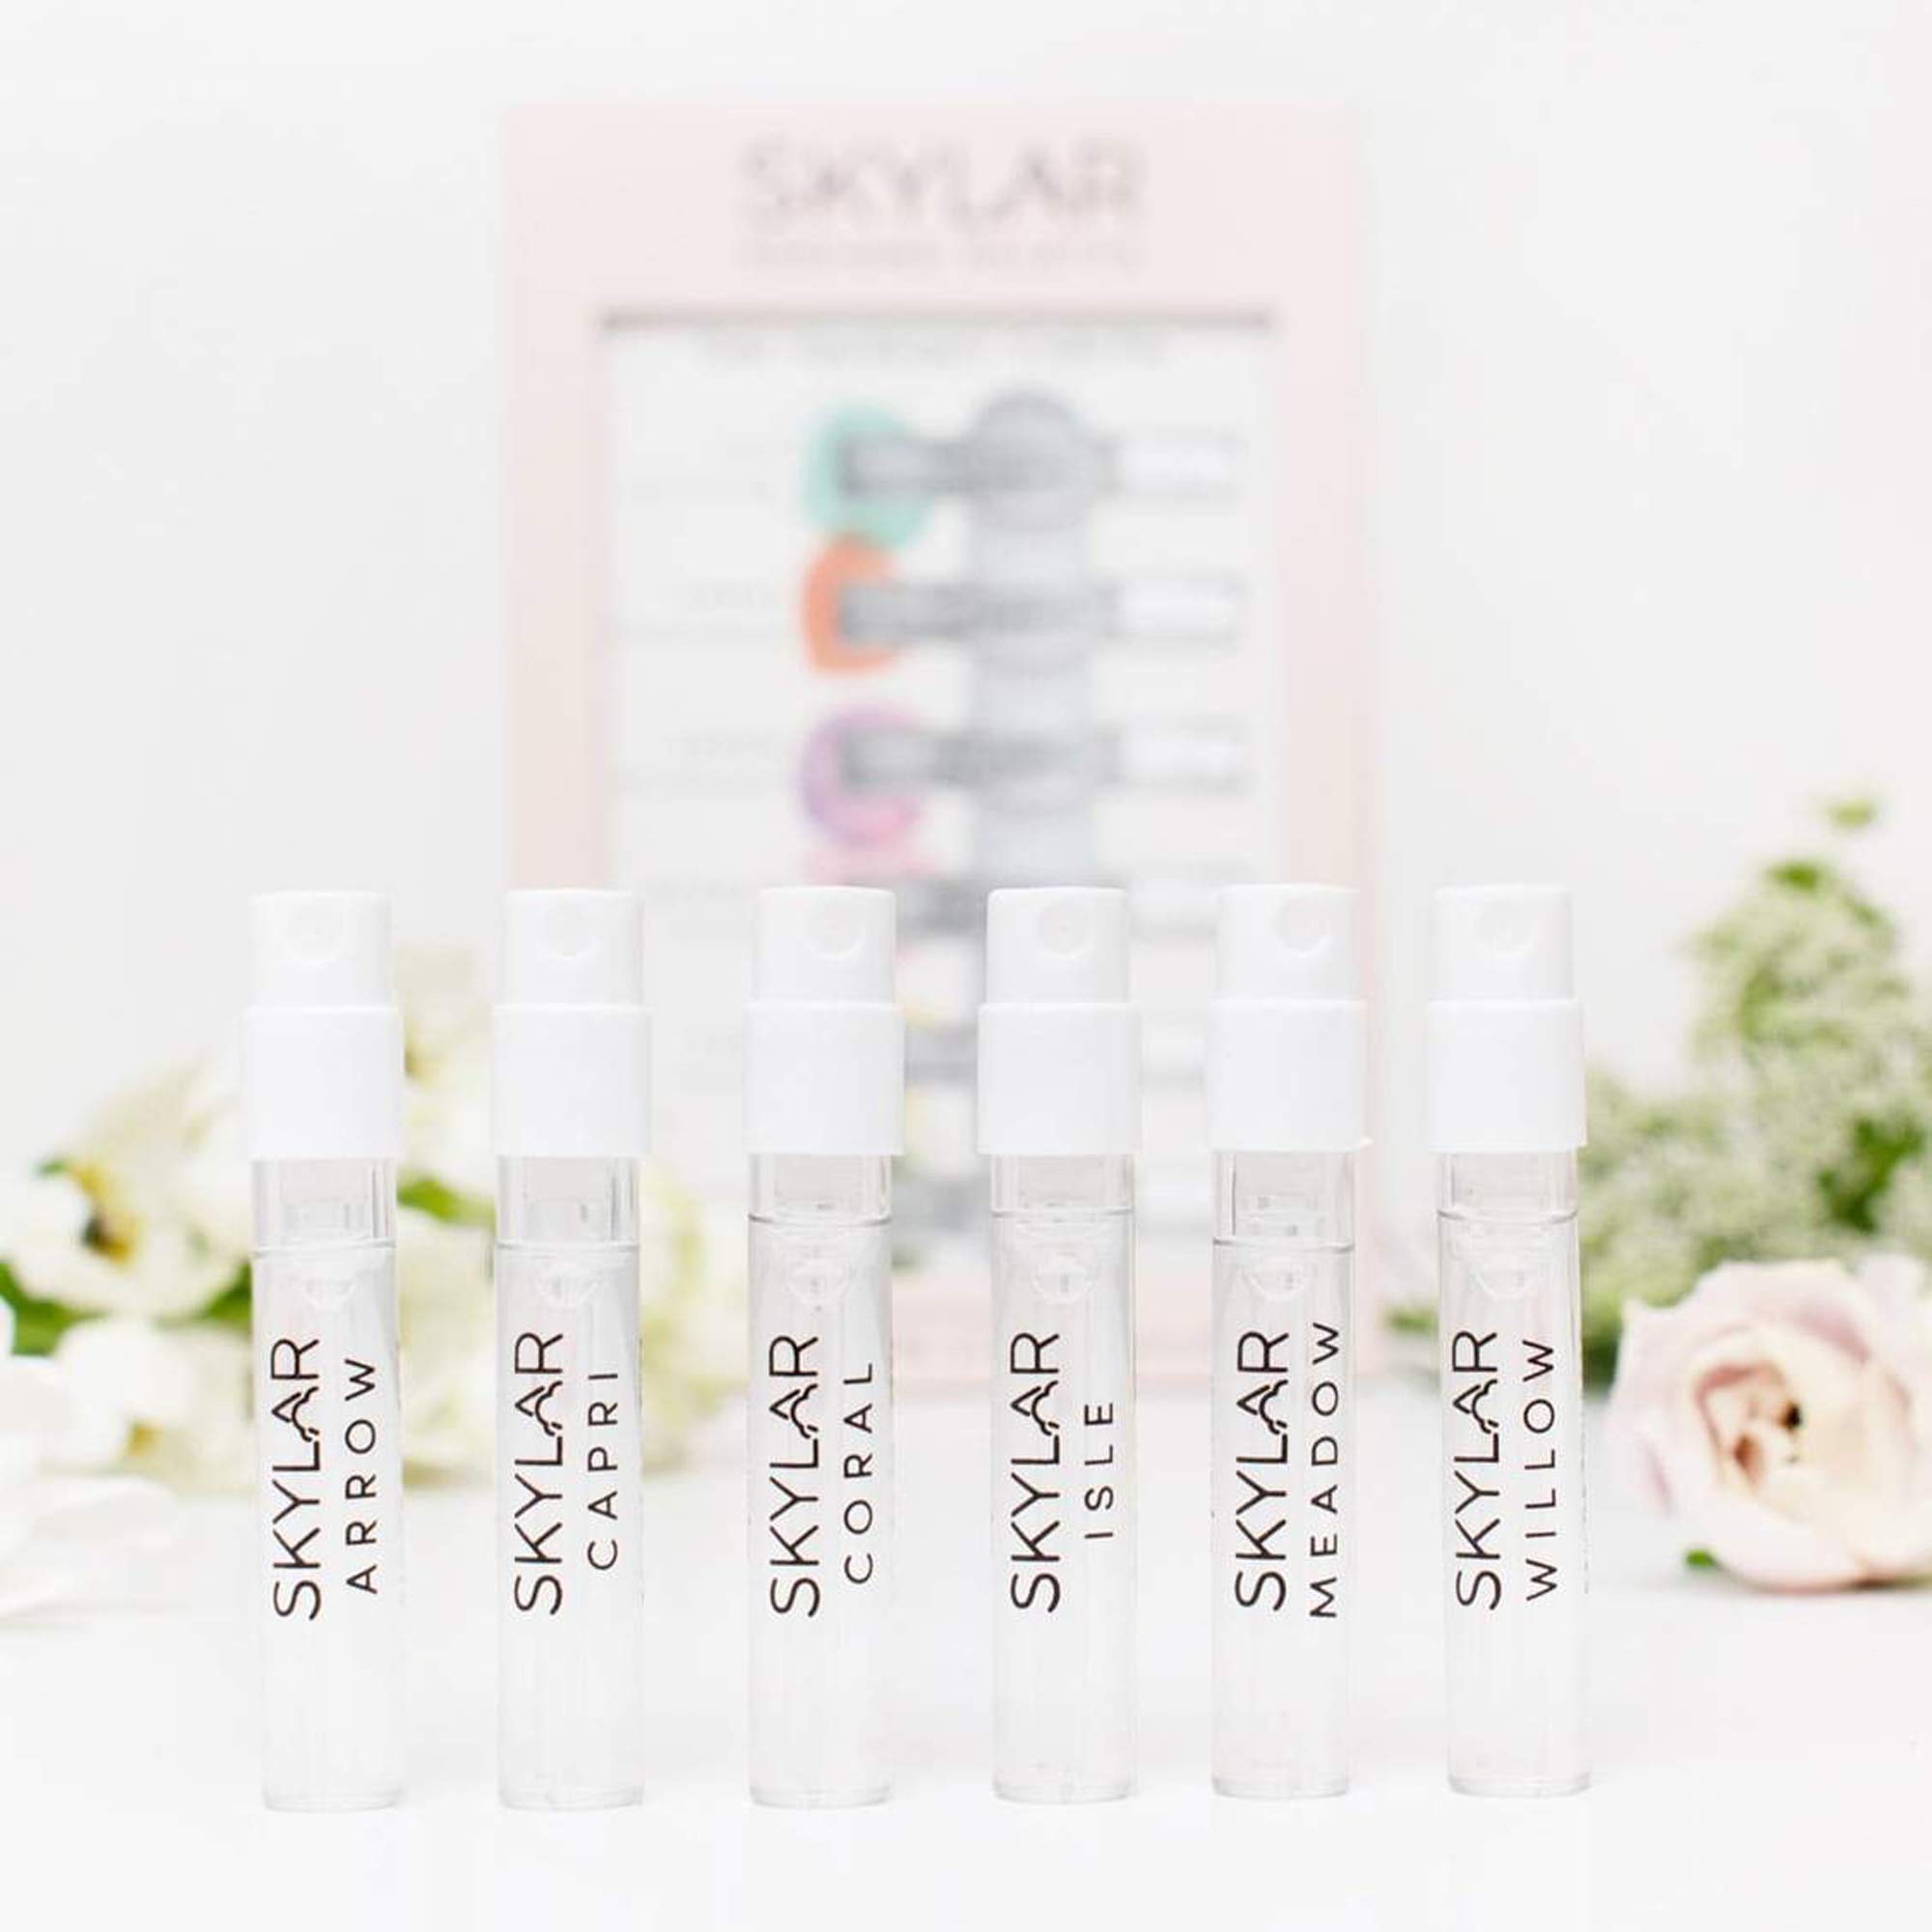 Perfume Palette By Skylar - 6 Signature Fragrances in 1 Convenient Travel-Sized Discovery Kit - Paraben-Free, Phthalate-Free, Vegan, and Cruelty-Free (6 x 1.5 mL / 0.05 fl oz)